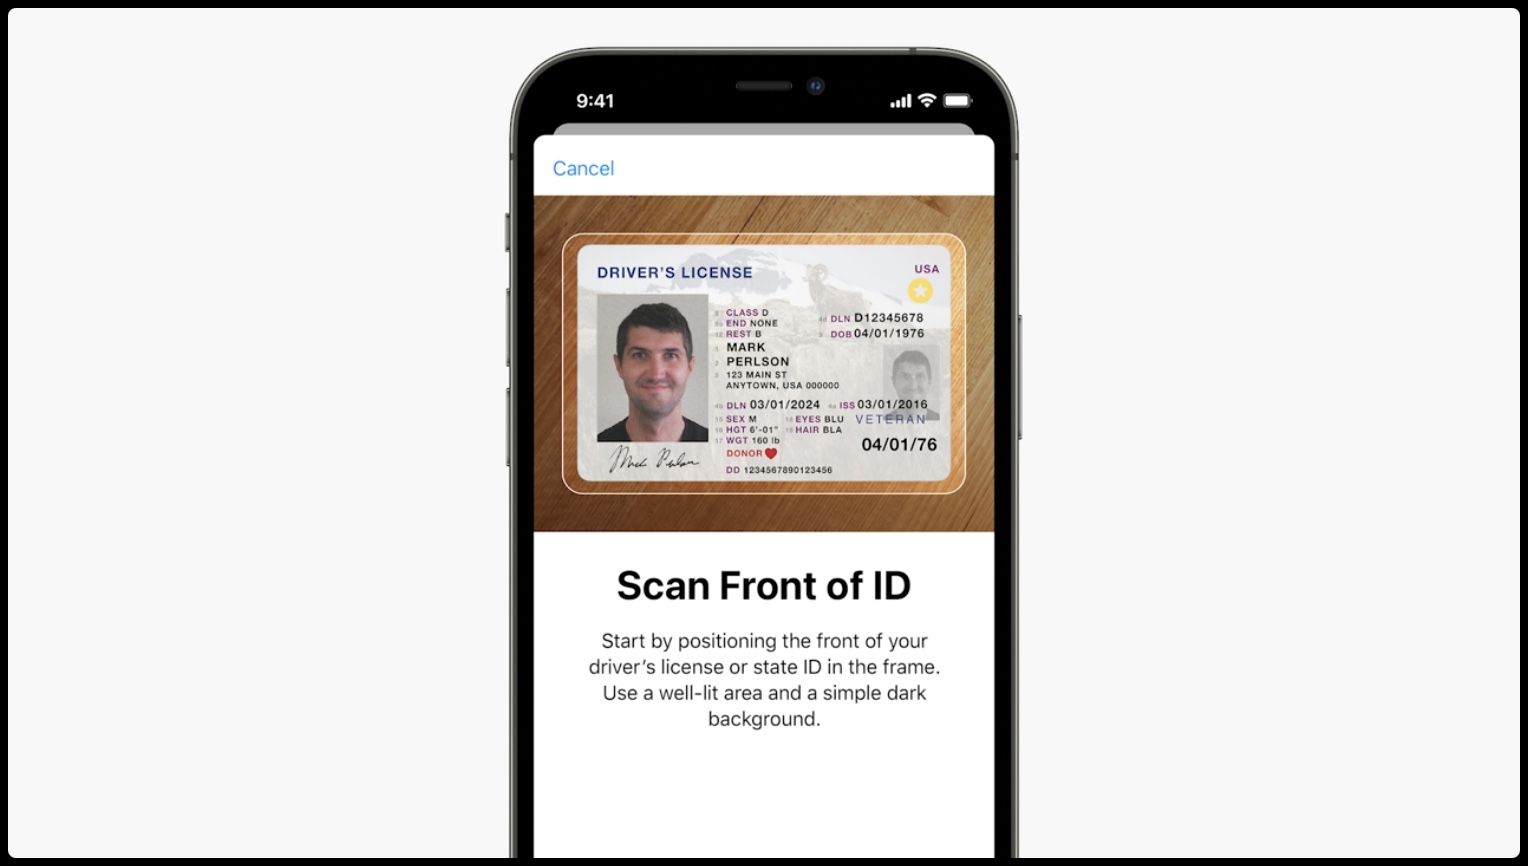 Apple's promotional image for iOS 15 showing an iPhone with a user's driver's license in the Wallet app